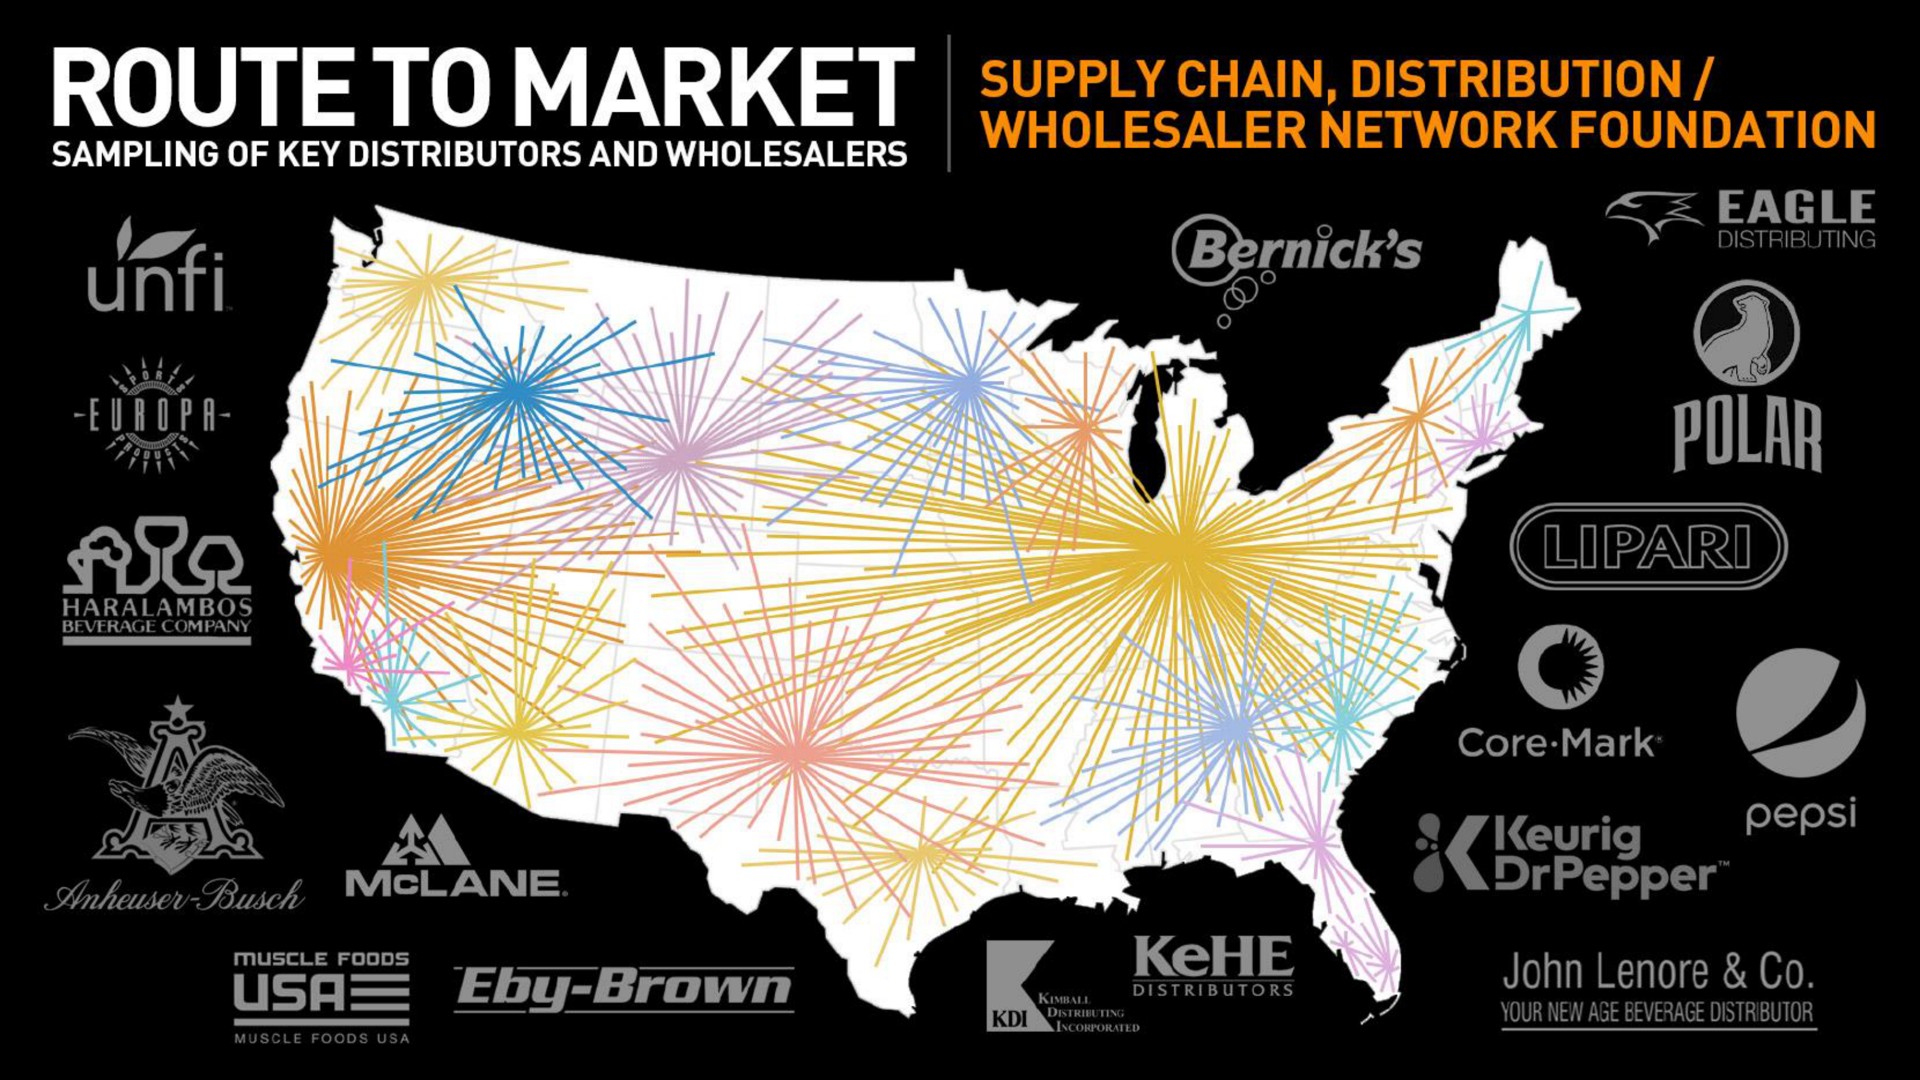 pee wholesaler network foundation supply chain distribution eagle be mao | Celsius Holdings